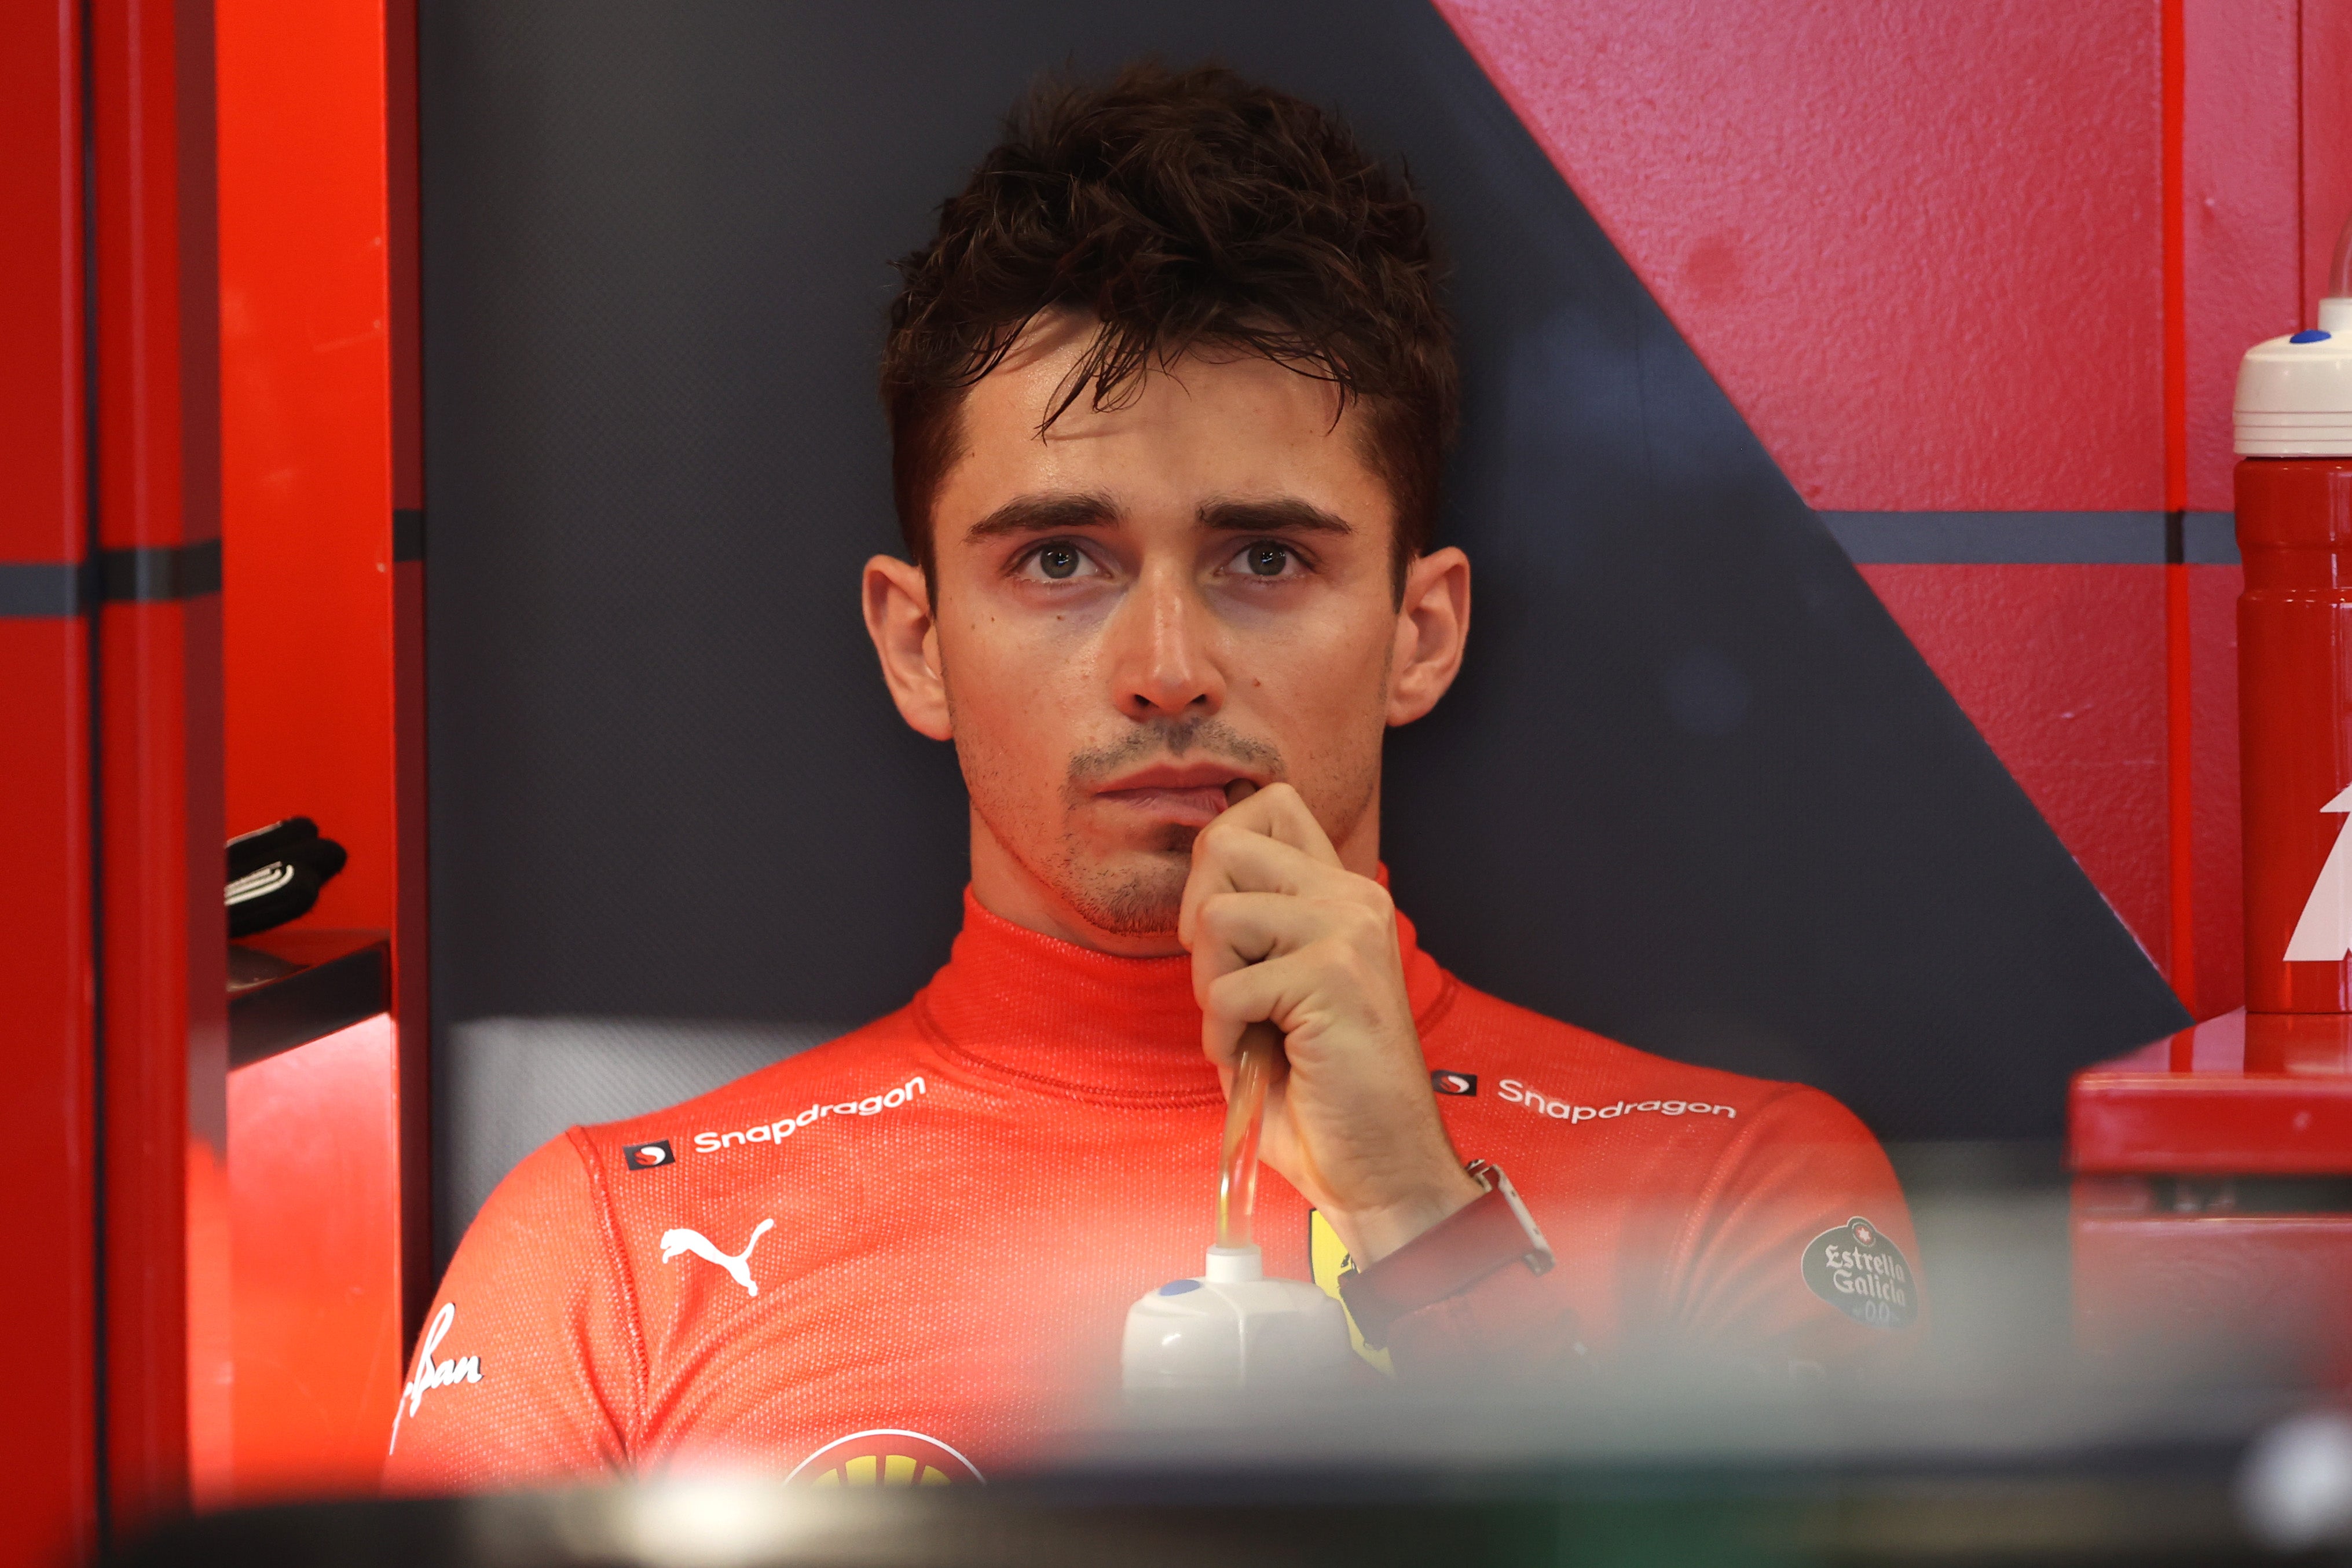 Charles Leclerc took his second pole position of 2022 in Australia.